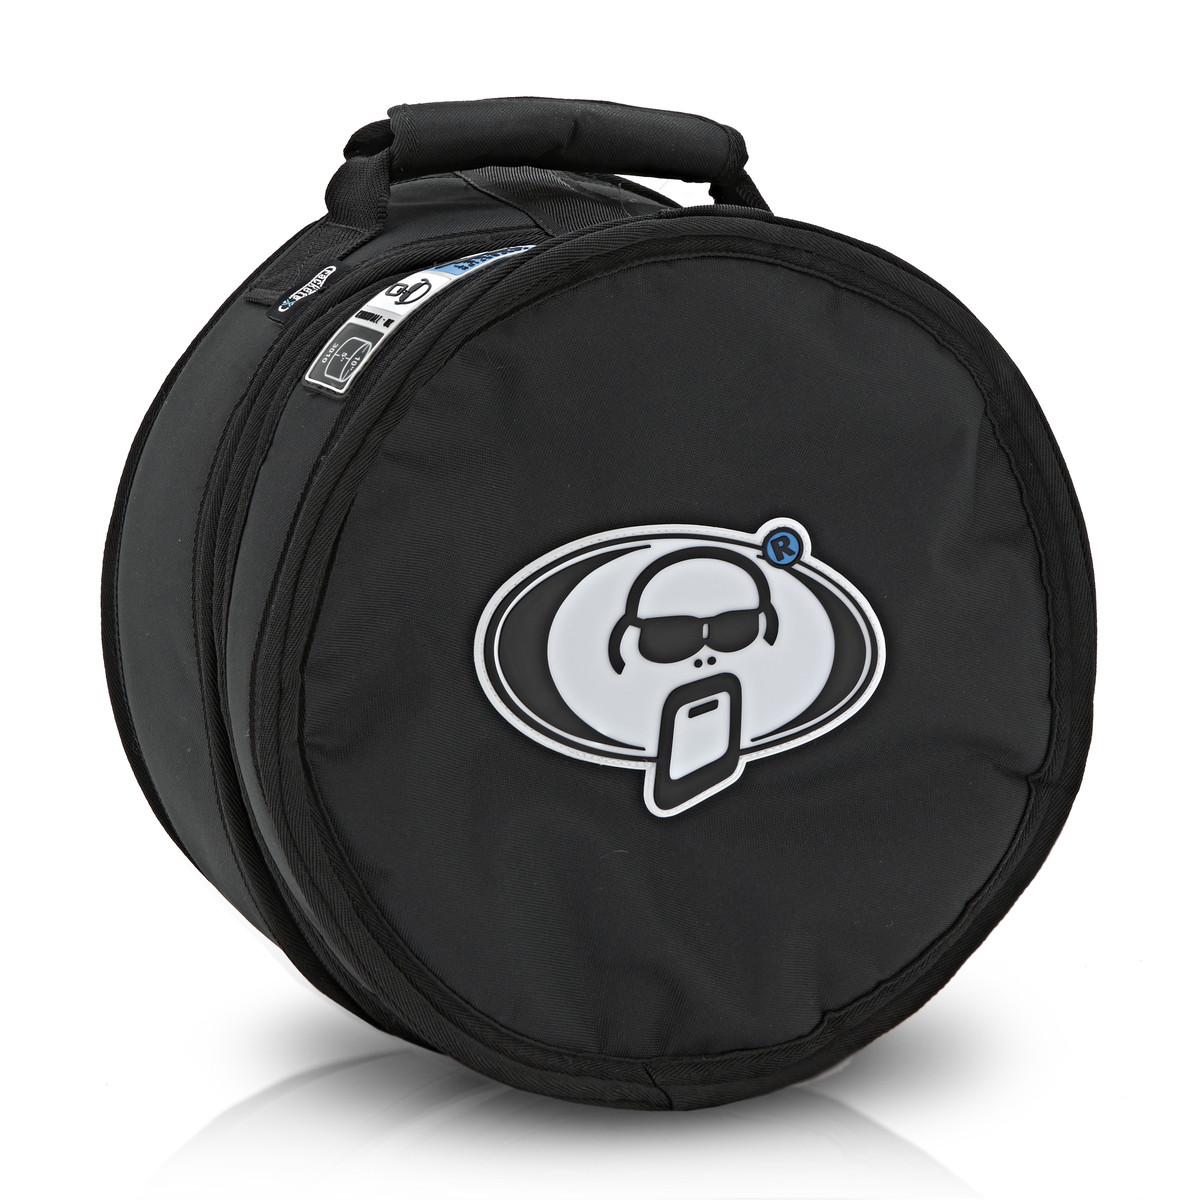 An image of Protection Racket 14x8 Snare Drum Case | PMT Online